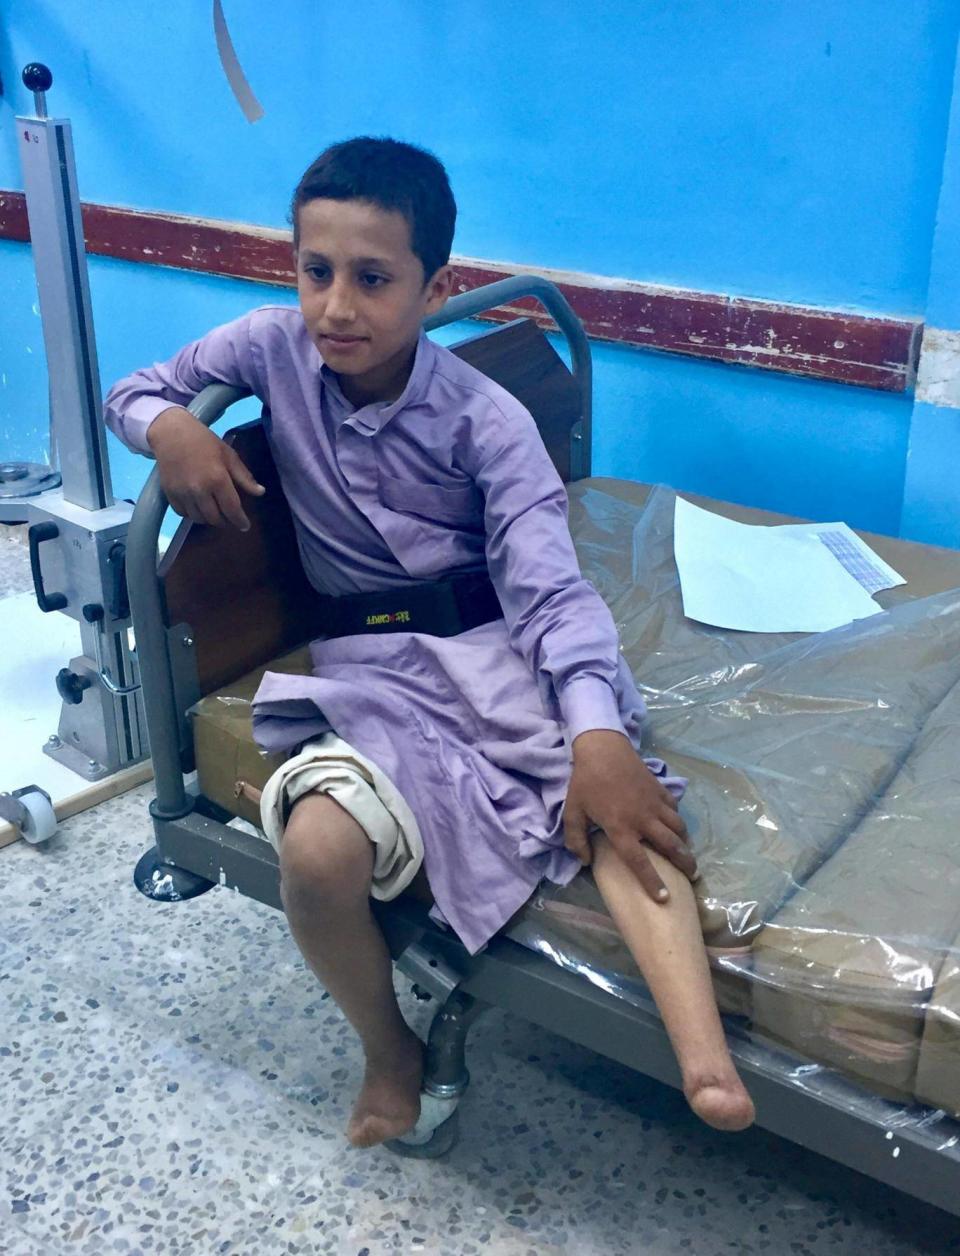 A boy who lost his left leg to a landmine is examined by a doctor at Marib General Hospital. Up to 16 people a week have been admitted needing amputations in recent months, hospital authorities said (Bethan McKernan)